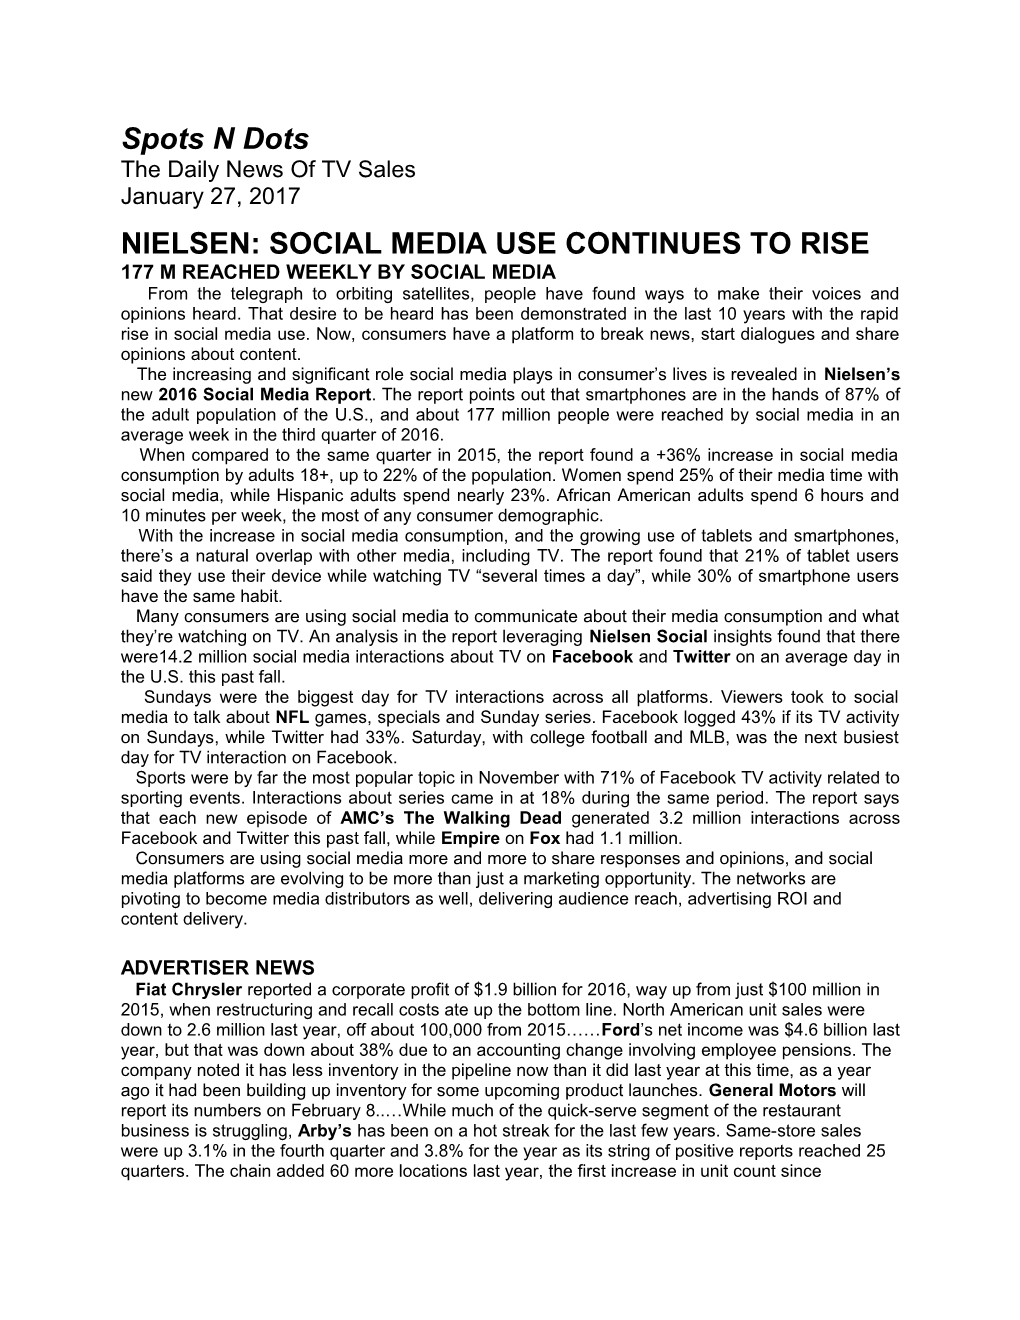 Nielsen: Social Media Use Continues to Rise